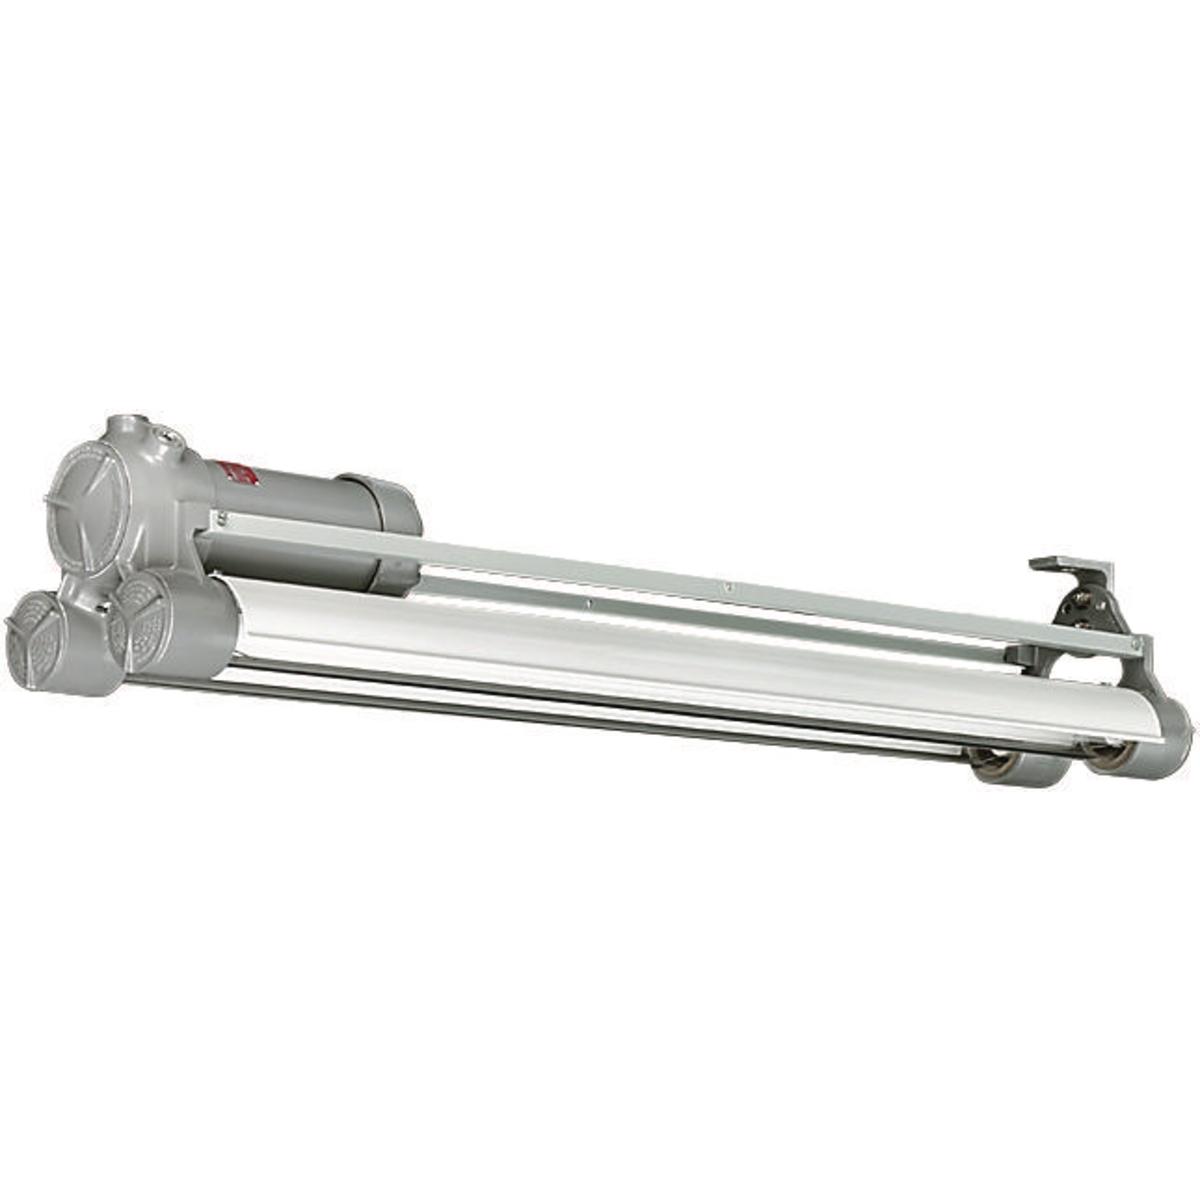 Hubbell HFX-40T-304 HFX 40W Flourescent 120/277V 4 Foot, 4 Lamp- Biaxial  ; UL Listed and labeled for use inside paint spray booths and rooms ; 2’ nominal compact models facilitate use in areas too small for nominal 4’ models, or where the light must be confined ; Standard b